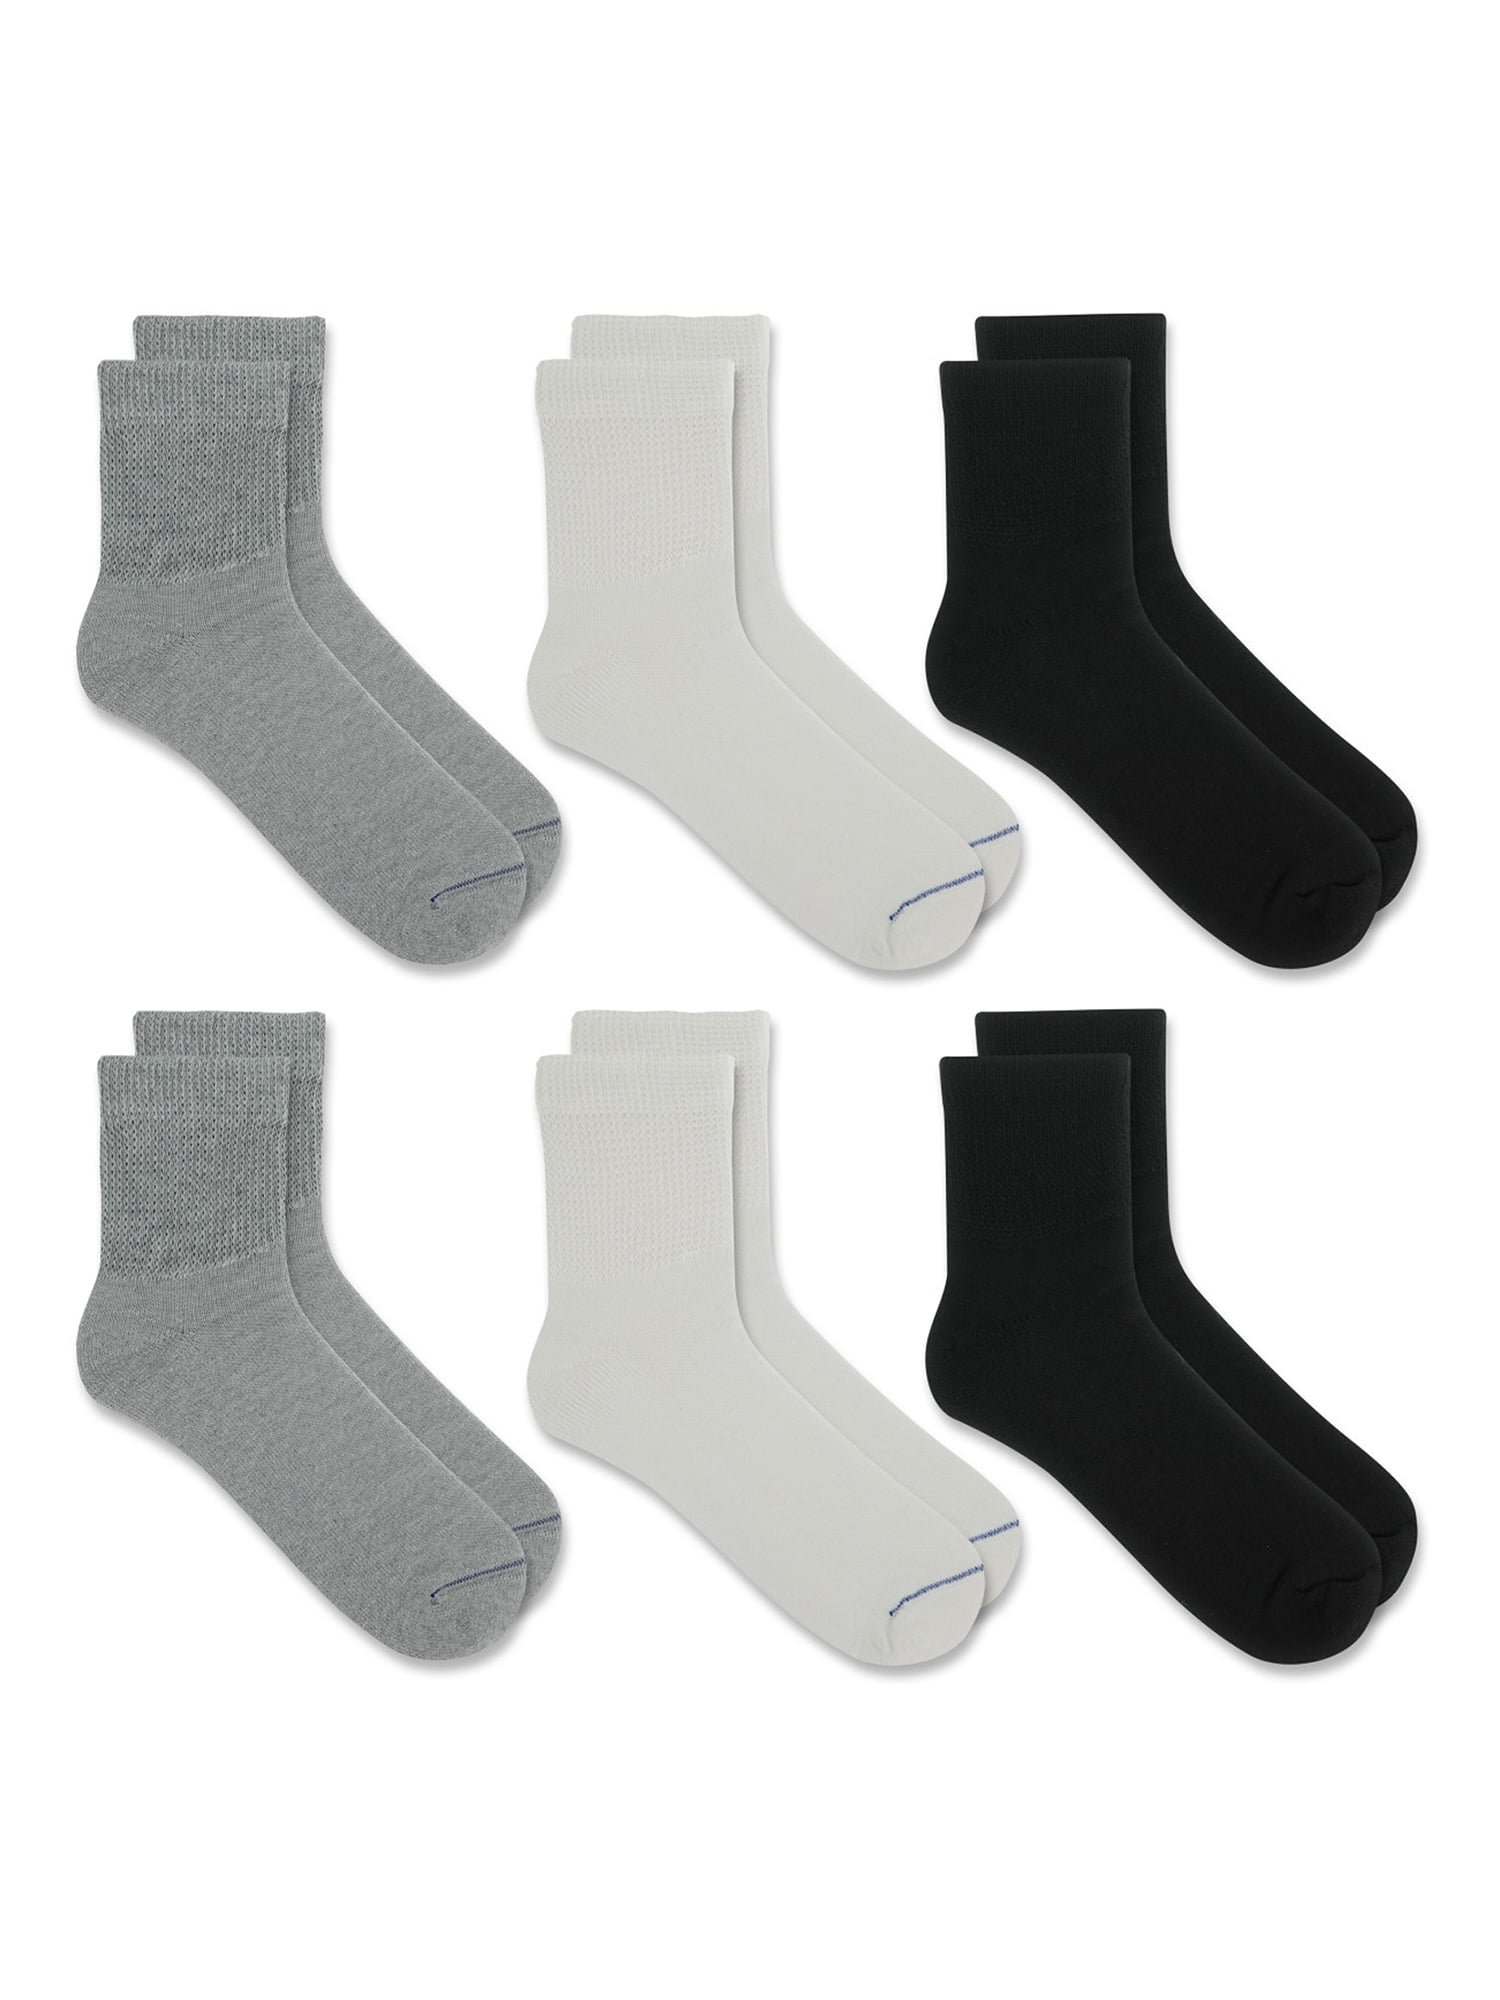 Dr. Scholl's Men's Diabetic Ankle Socks 2-Pack COMFORT & RELIEF MADE IN  USA